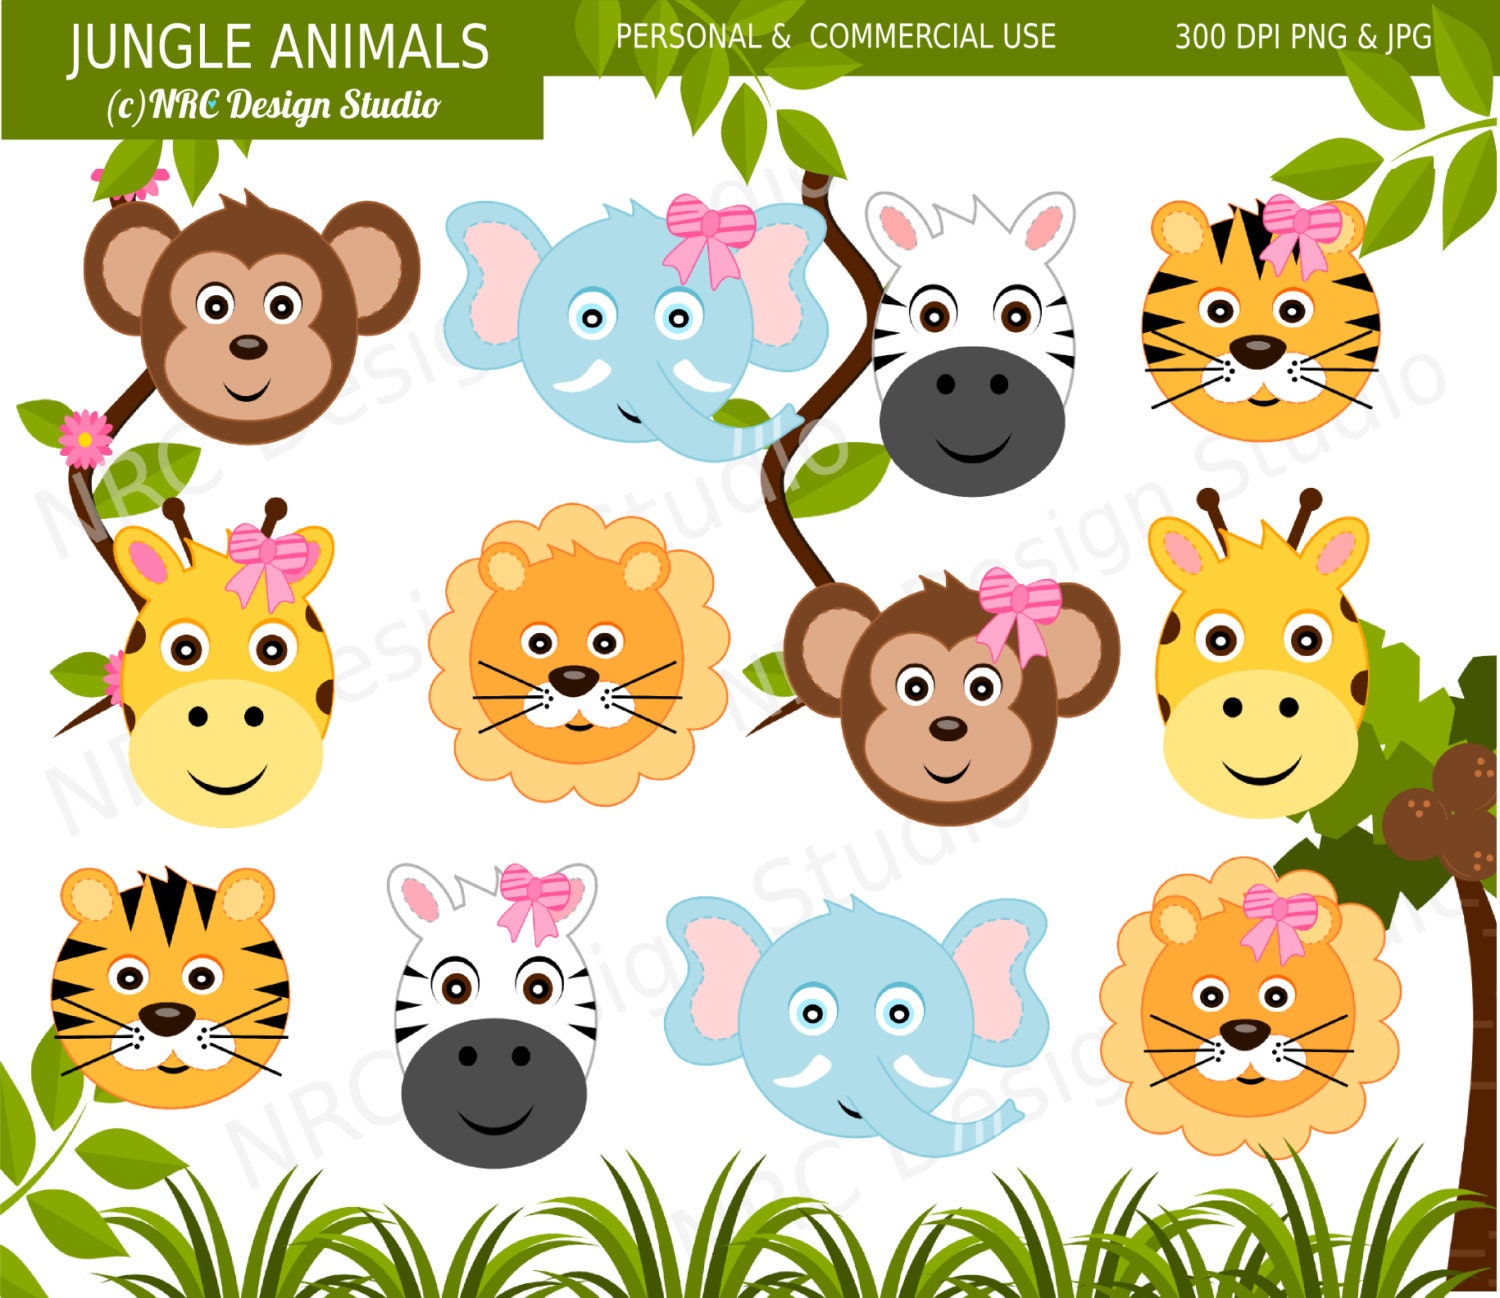 free clipart images jungle animals - photo #41